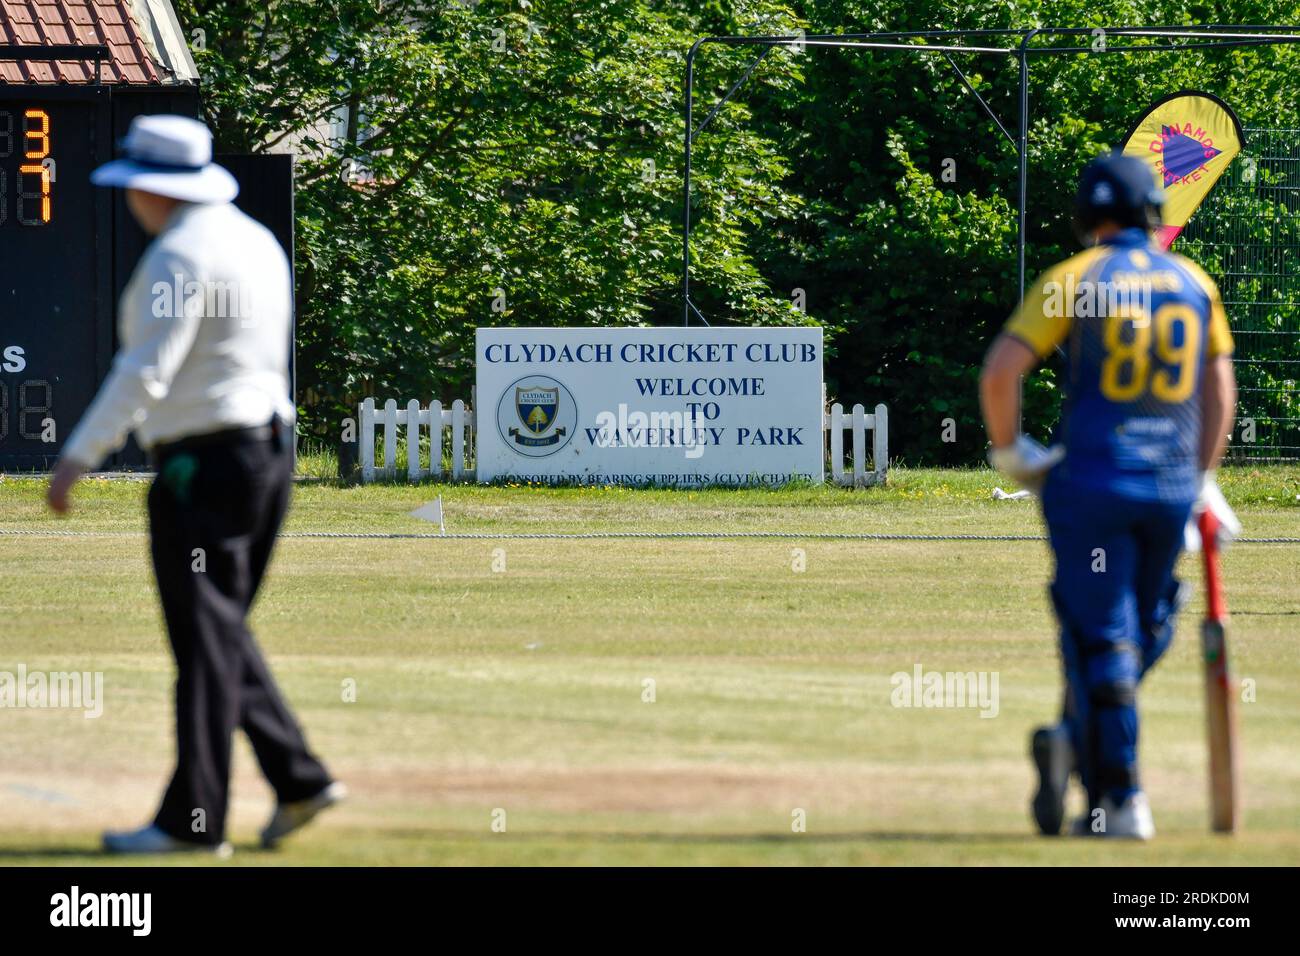 Clydach, Wales. 3 June 2023. The welcome sign near the boundary during the South Wales Premier Cricket League Division Two match between Clydach and Chepstow at Waverley Park in Clydach, Wales, UK on 3 June 2023. Credit: Duncan Thomas/Majestic Media. Stock Photo